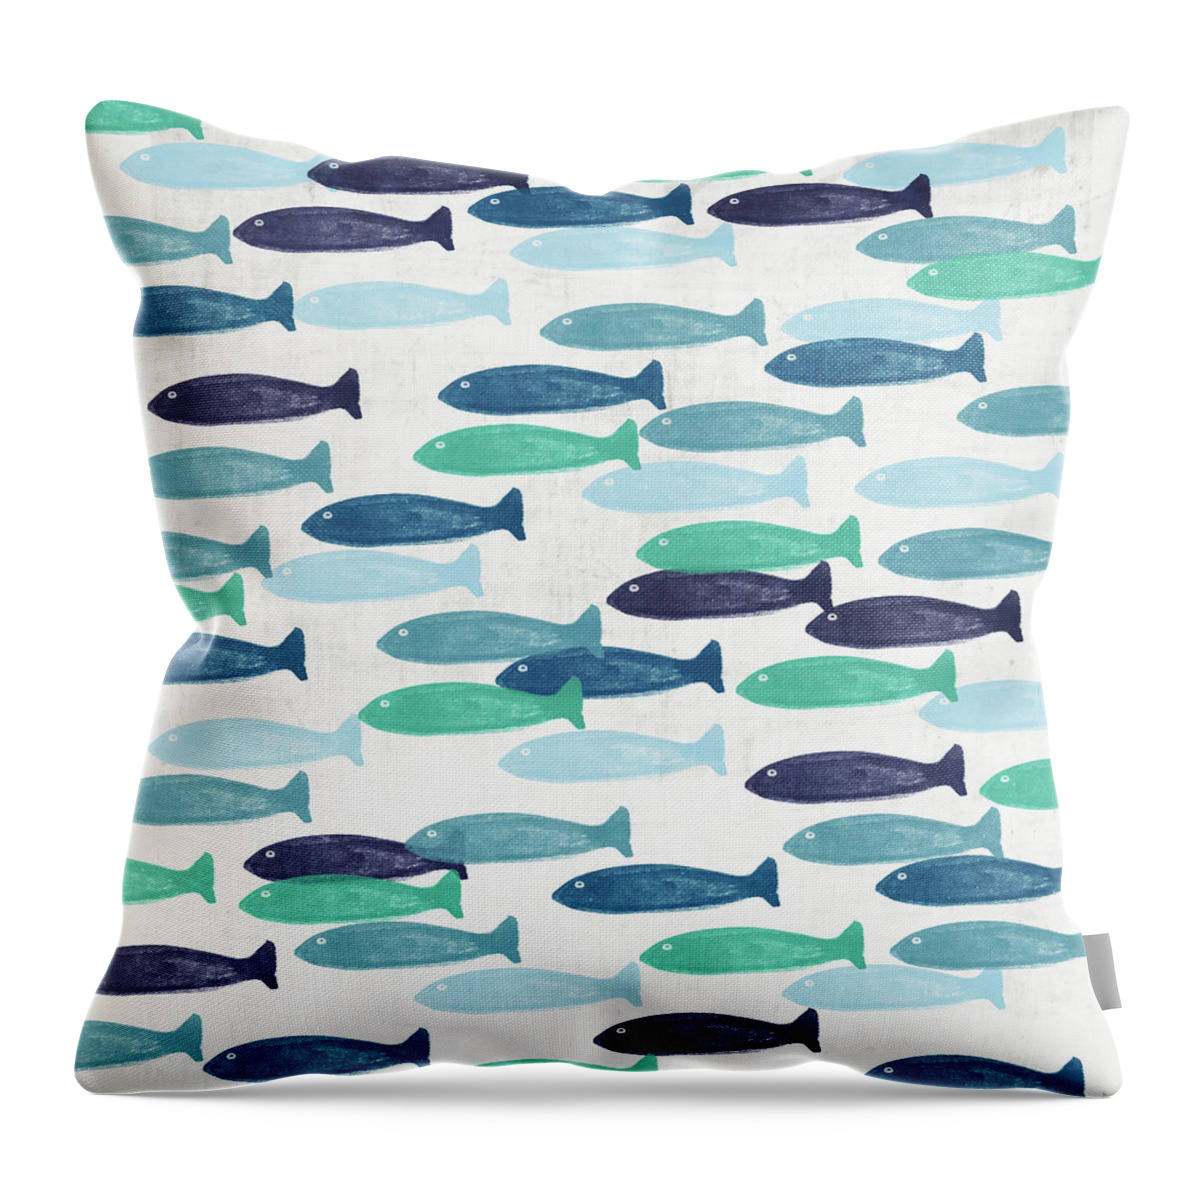 Fish Throw Pillow featuring the mixed media Ocean Fish- Art by Linda Woods by Linda Woods